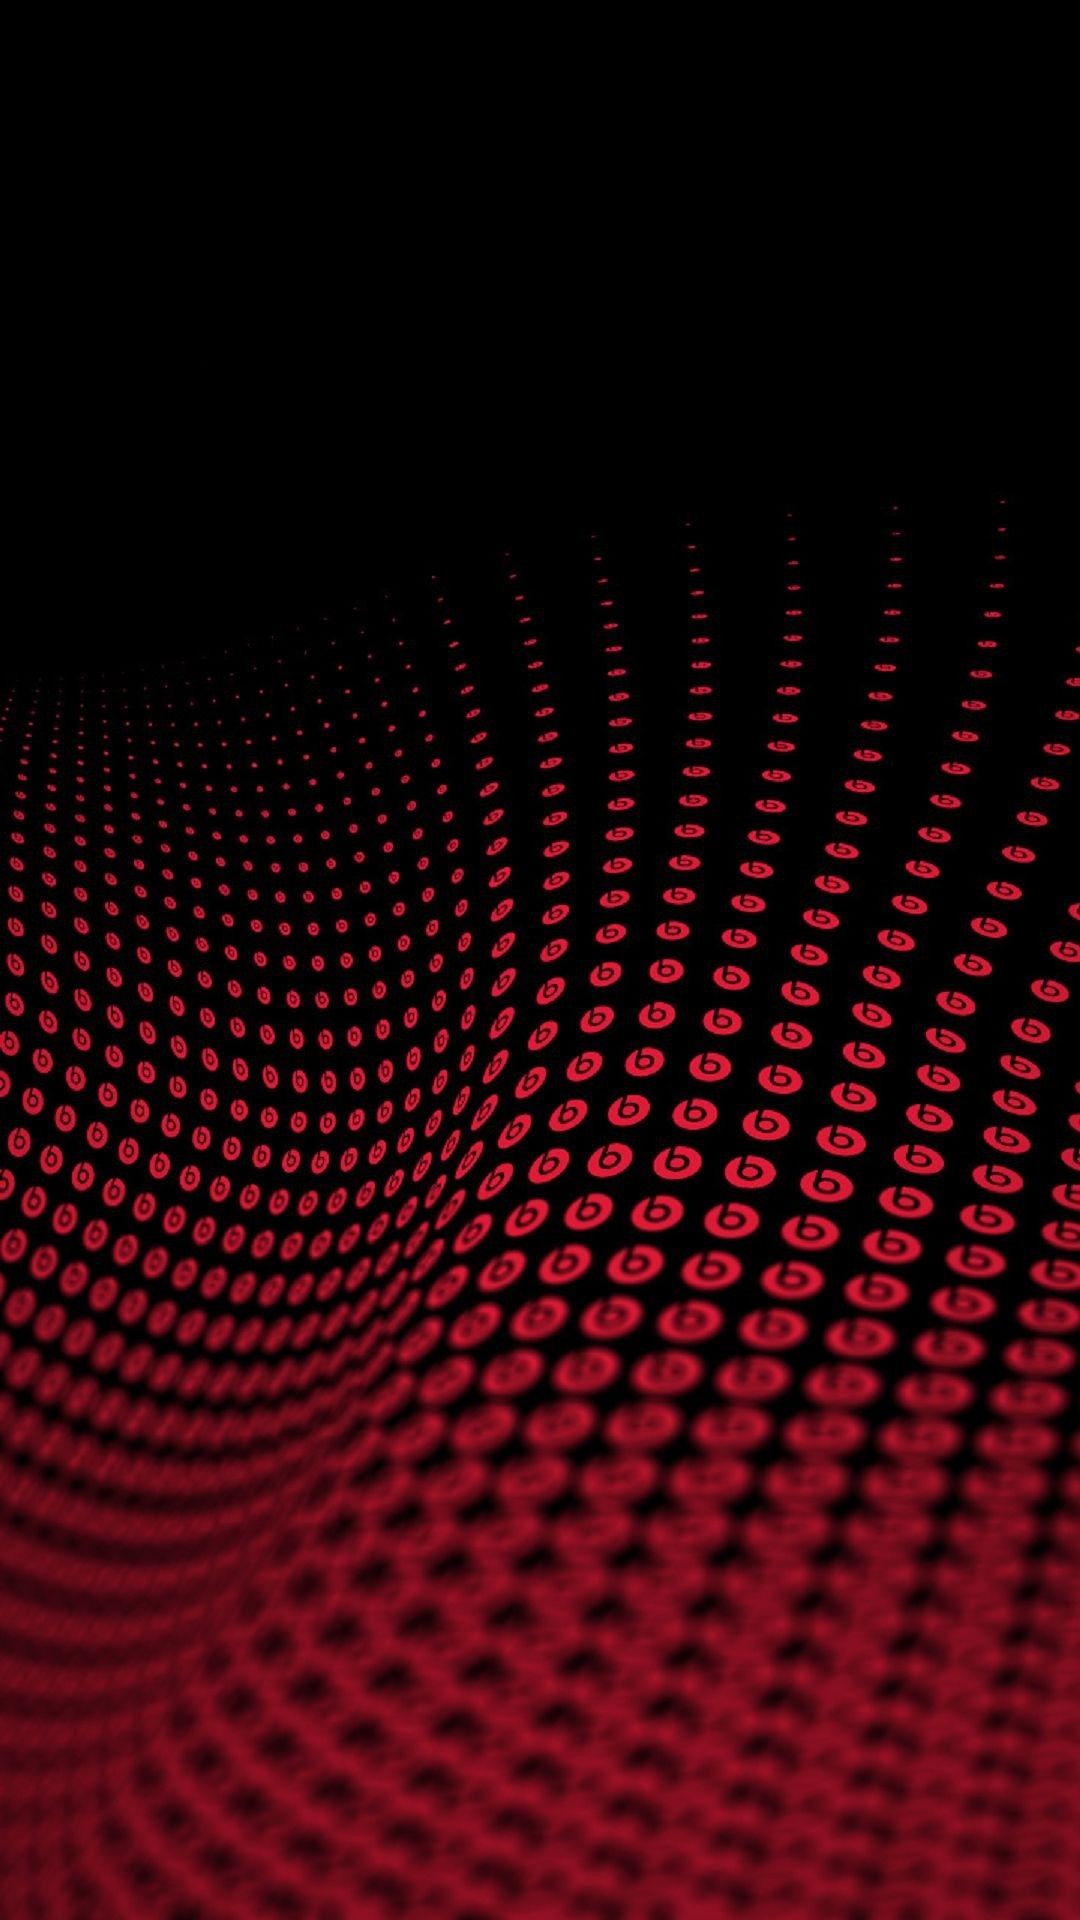 Beats Logo Dot Pattern Lg Smartphone Wallpaper And Beats Wallpaper For Iphone 6 1080x1920 Wallpaper Teahub Io Hd wallpapers and background images. beats logo dot pattern lg smartphone